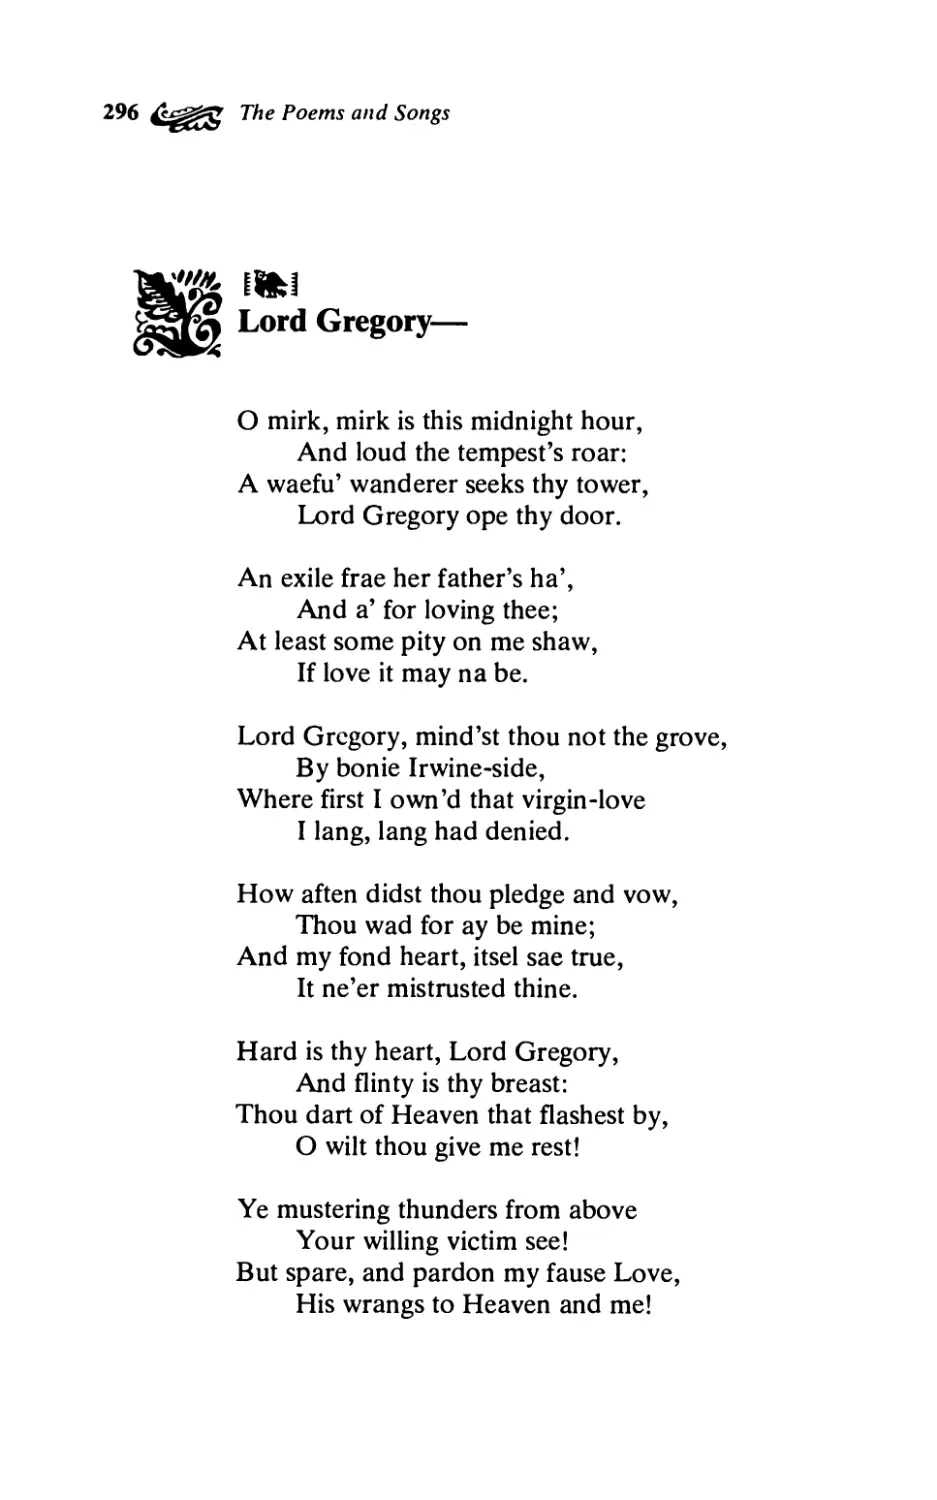 Lord Gregory-